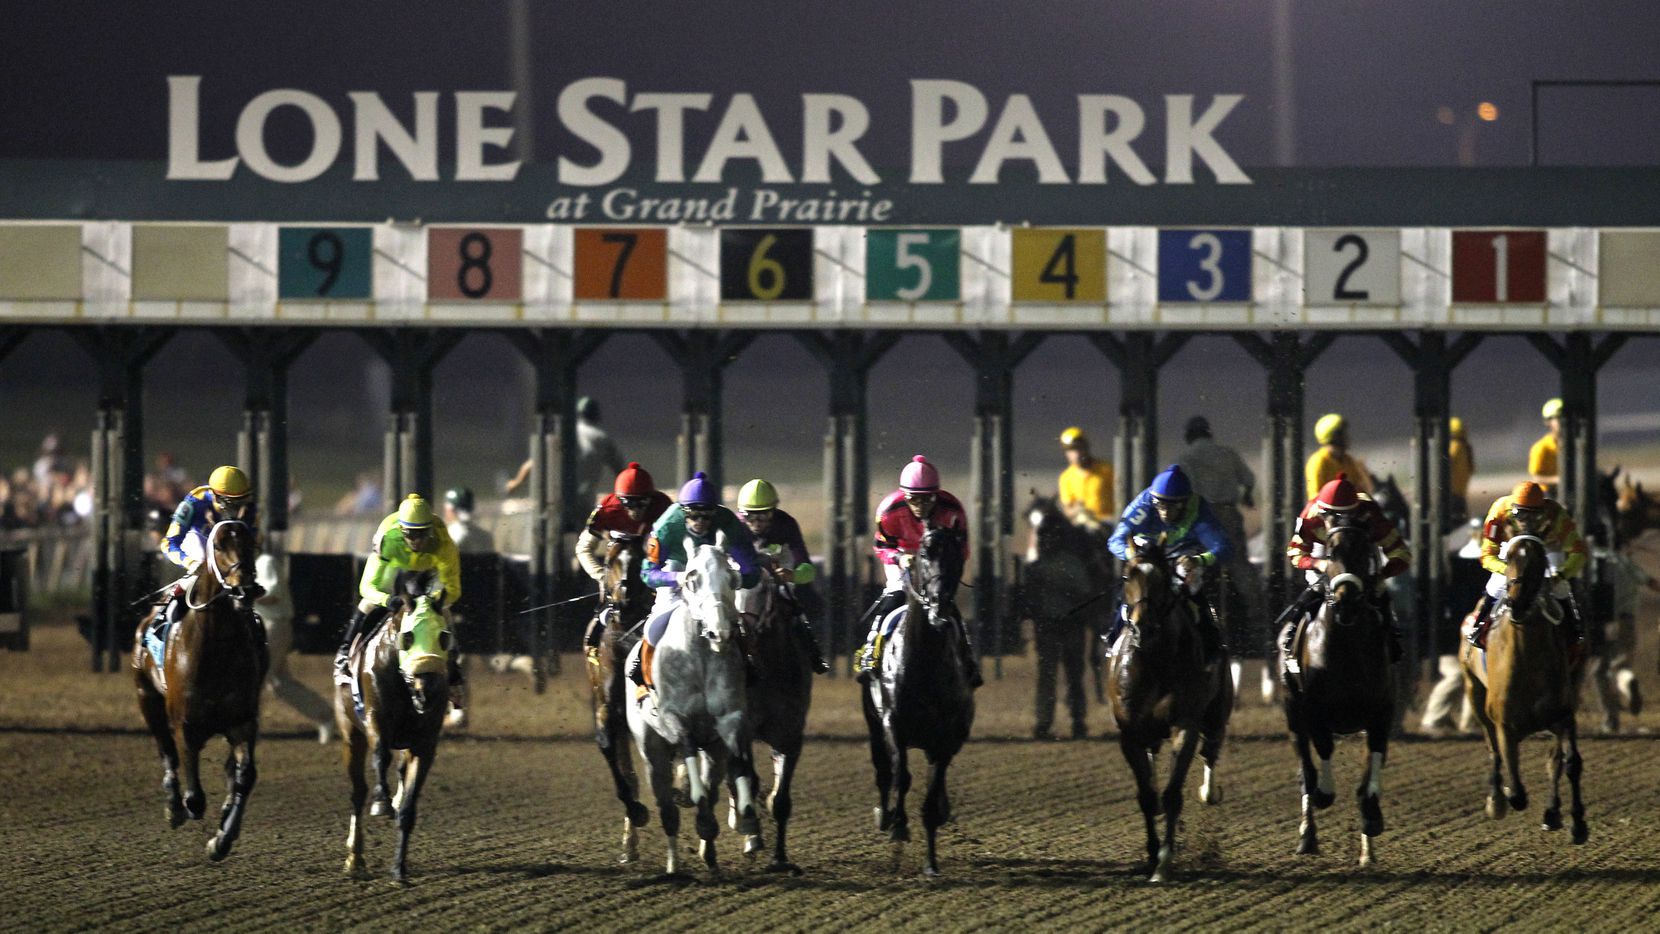 Thoroughbred races will kick off next week at Lone Star Park in Grand